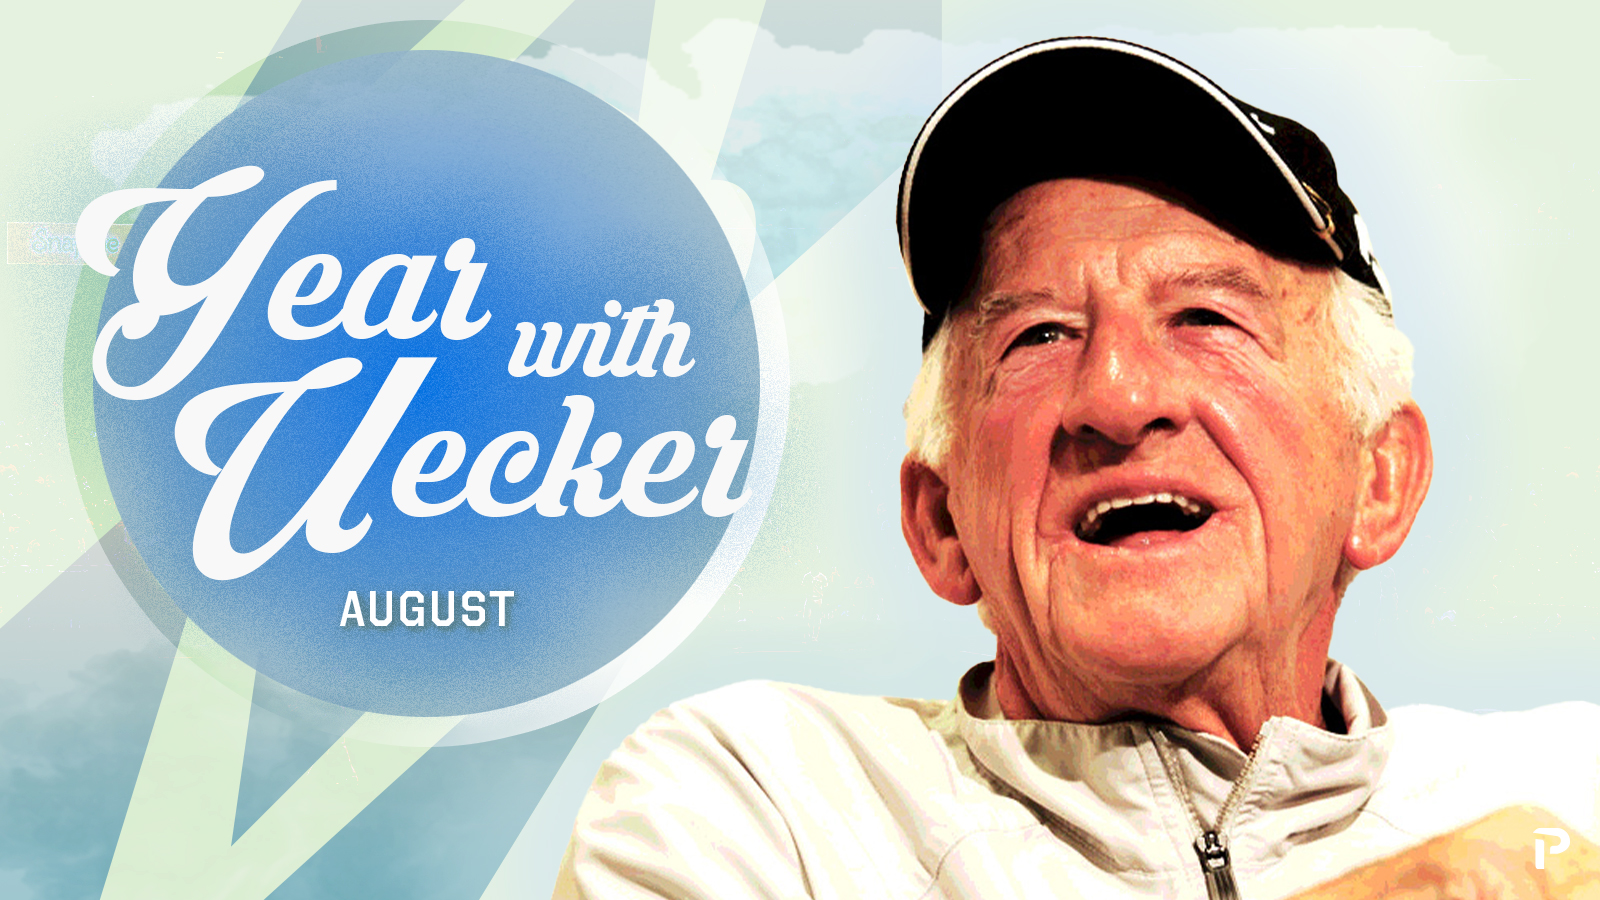 Year with Uecker: August